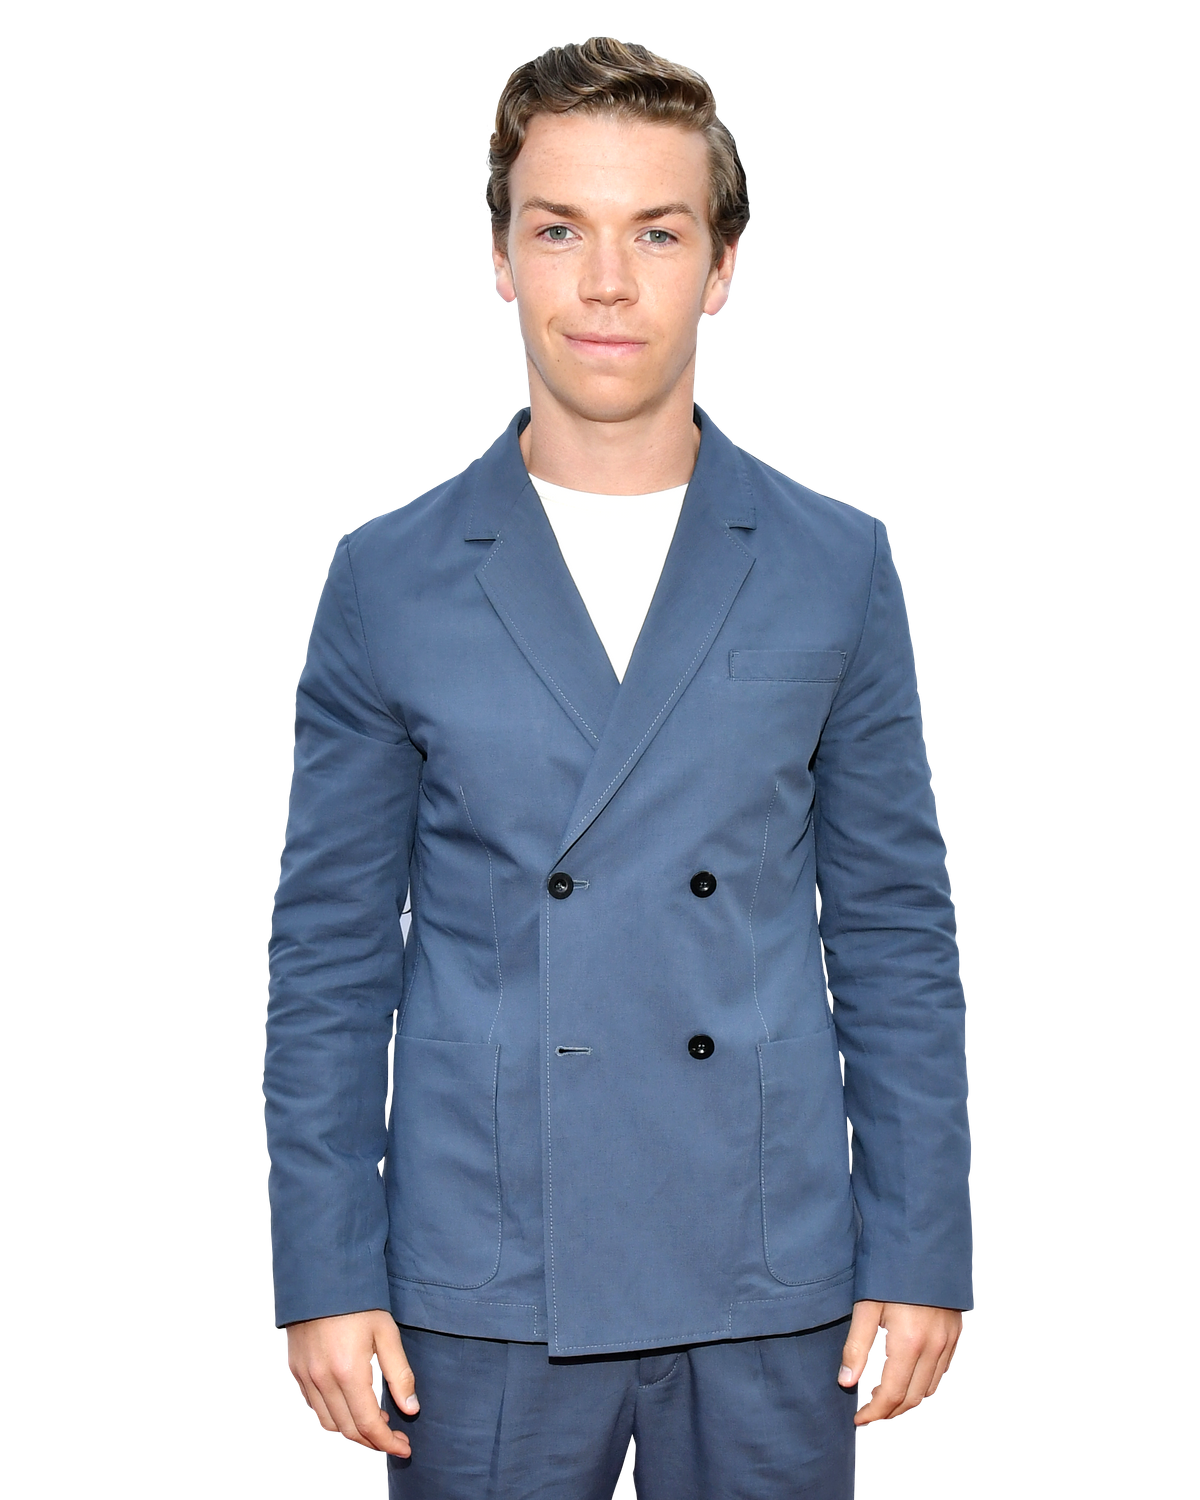 Will Poulter PNG File